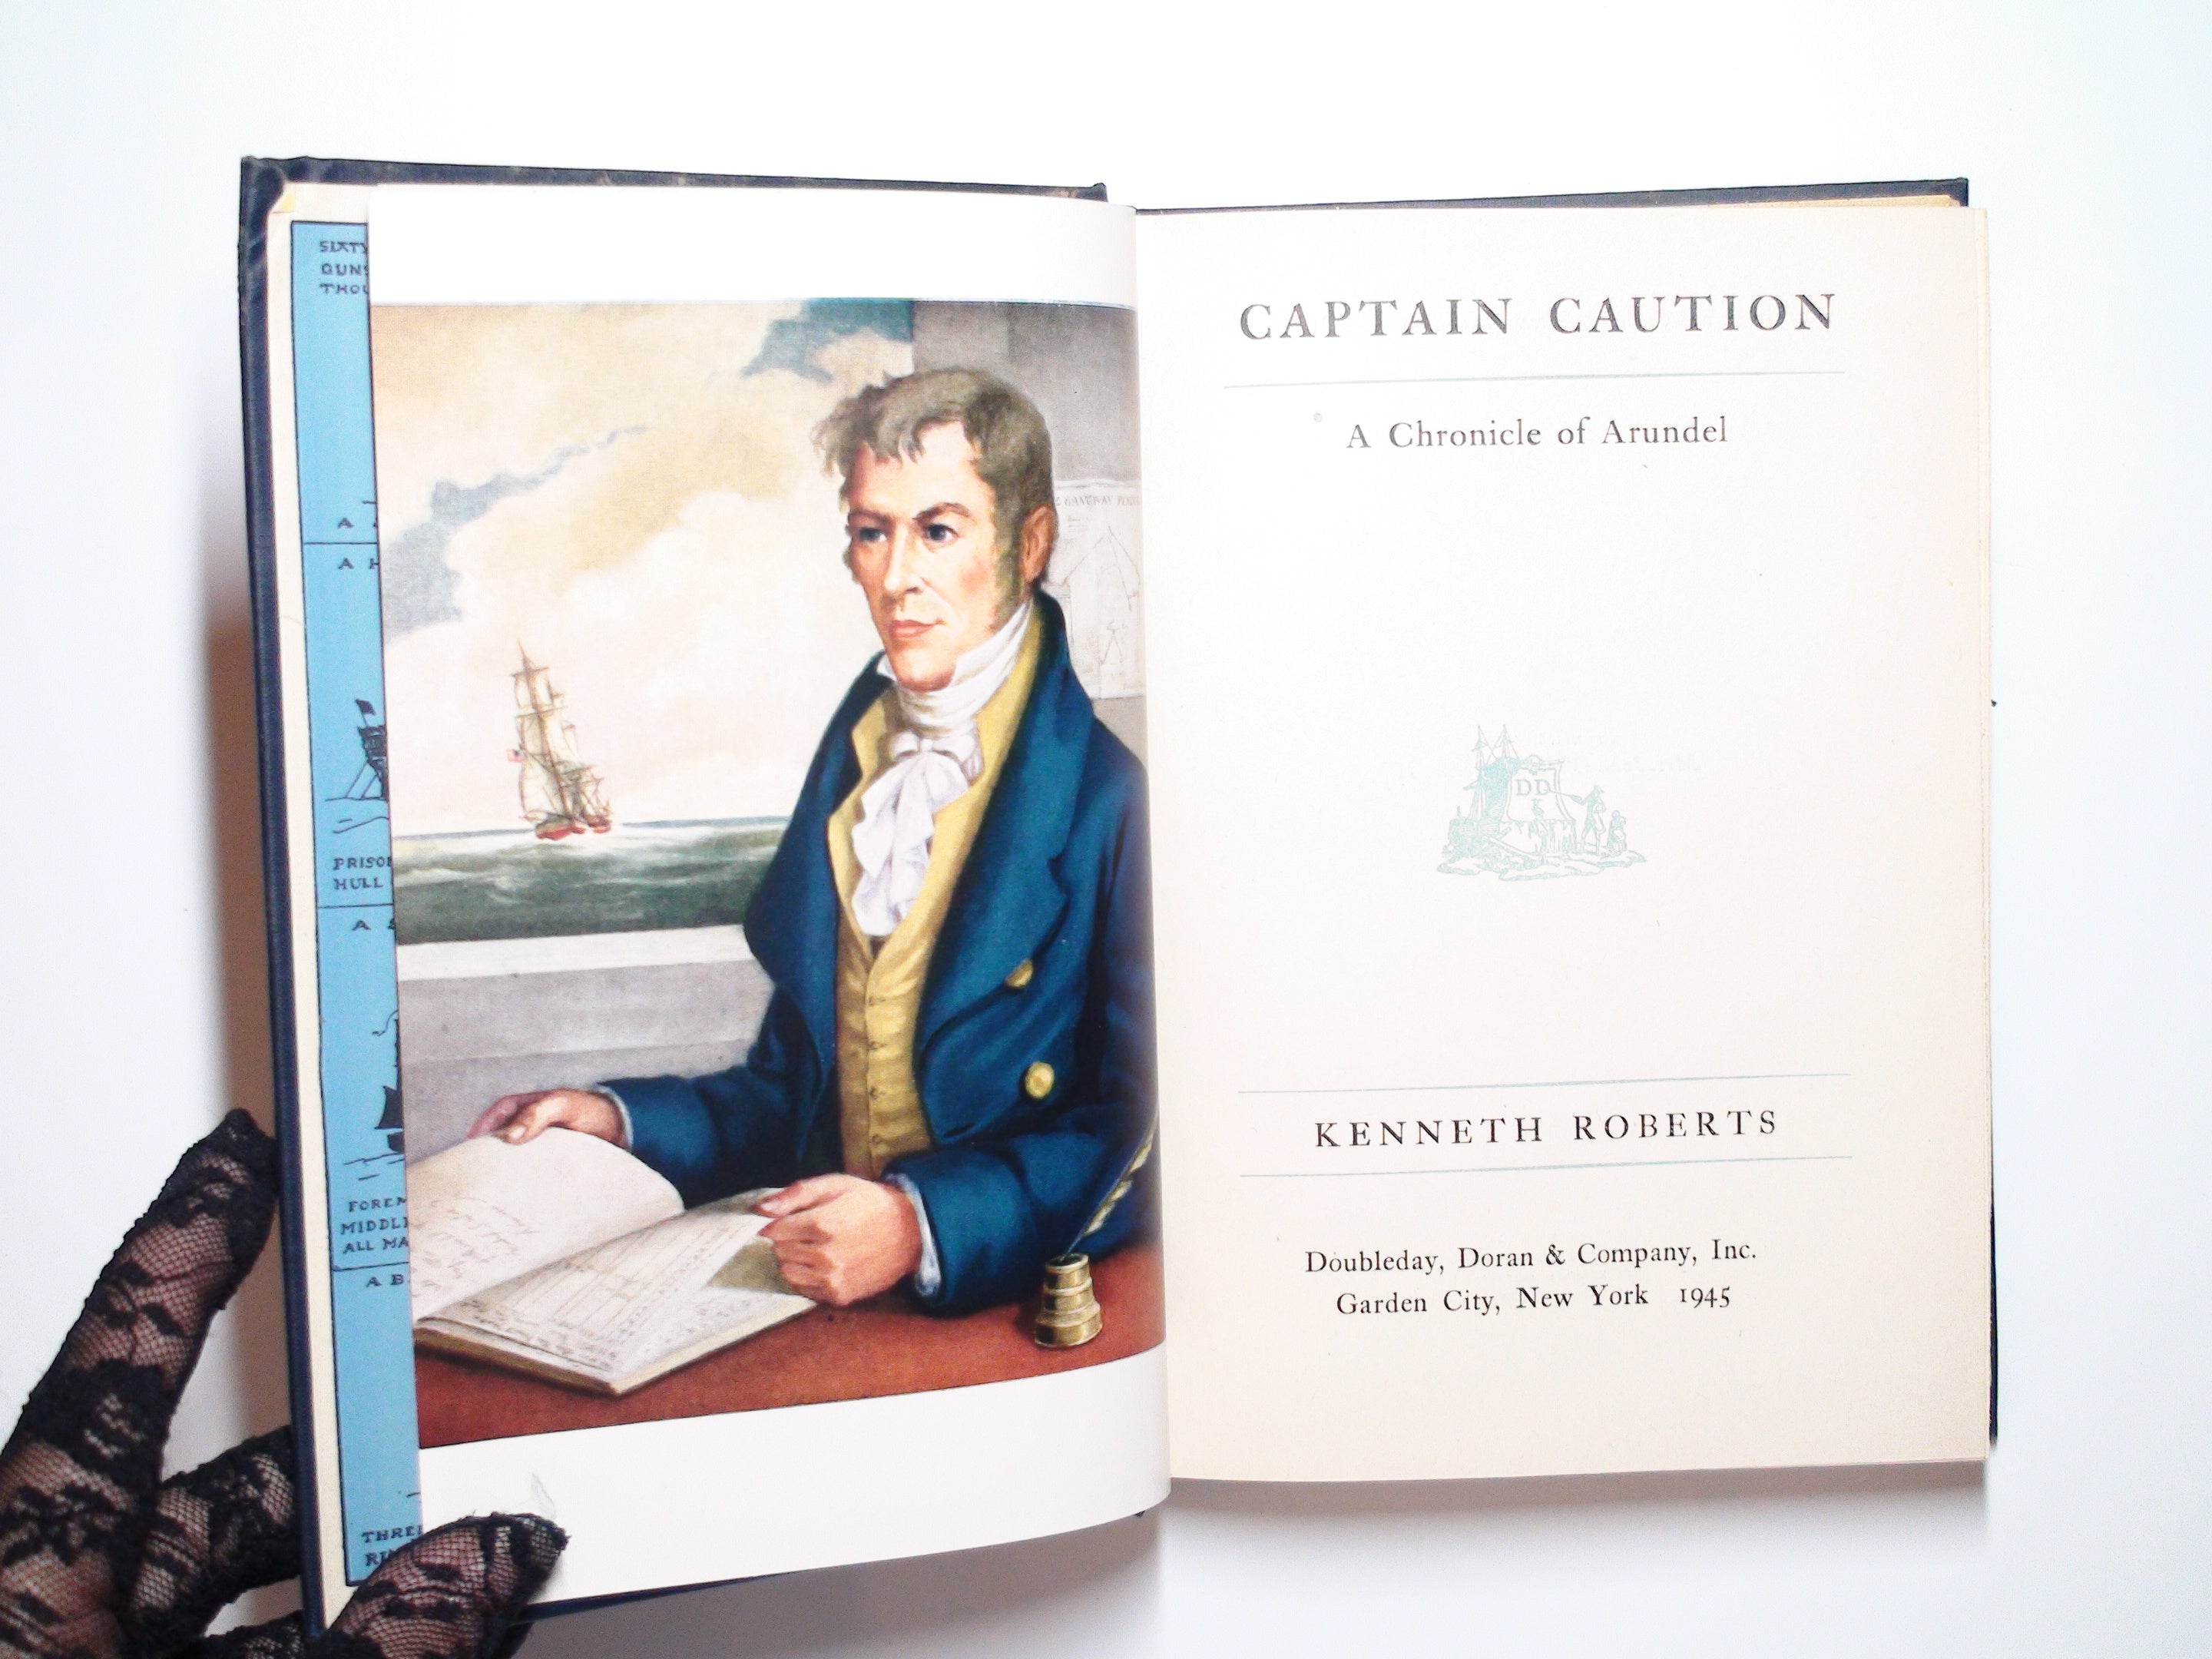 Captain Caution, A Chronicle of Arundel, by Kenneth Roberts, 1945